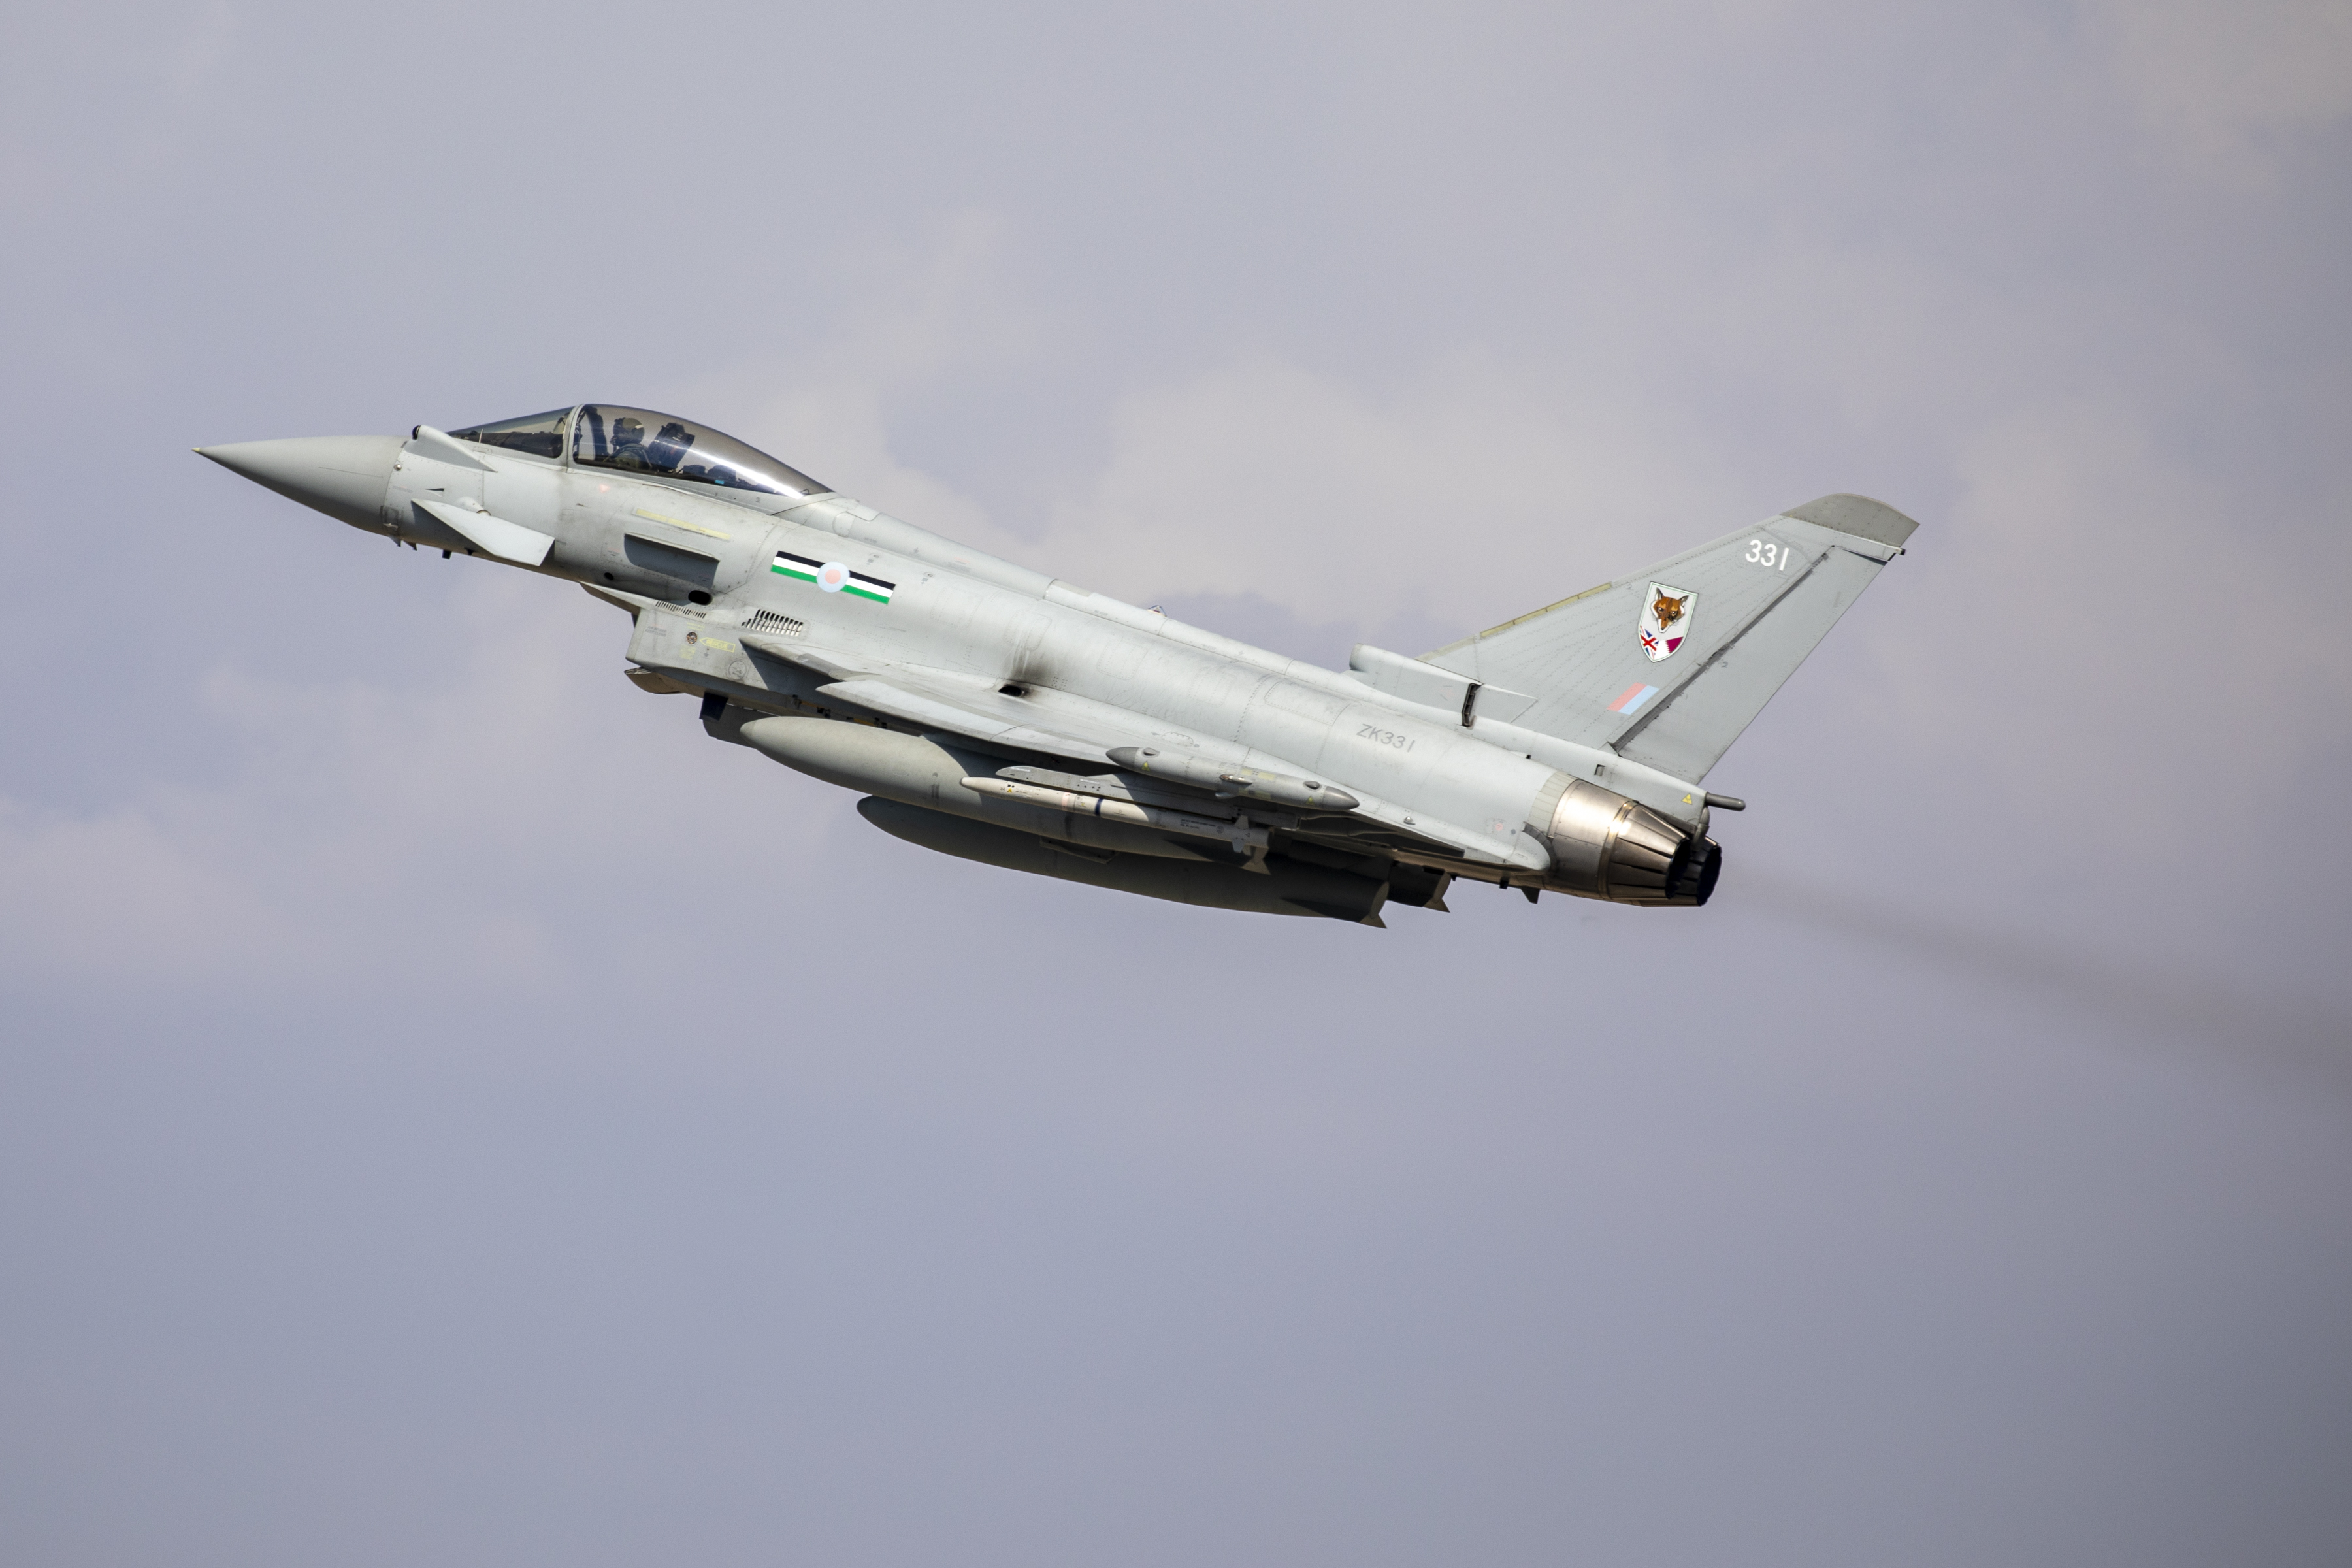 Image shows Typhoon in flight with the Qatari flag on its body paint.